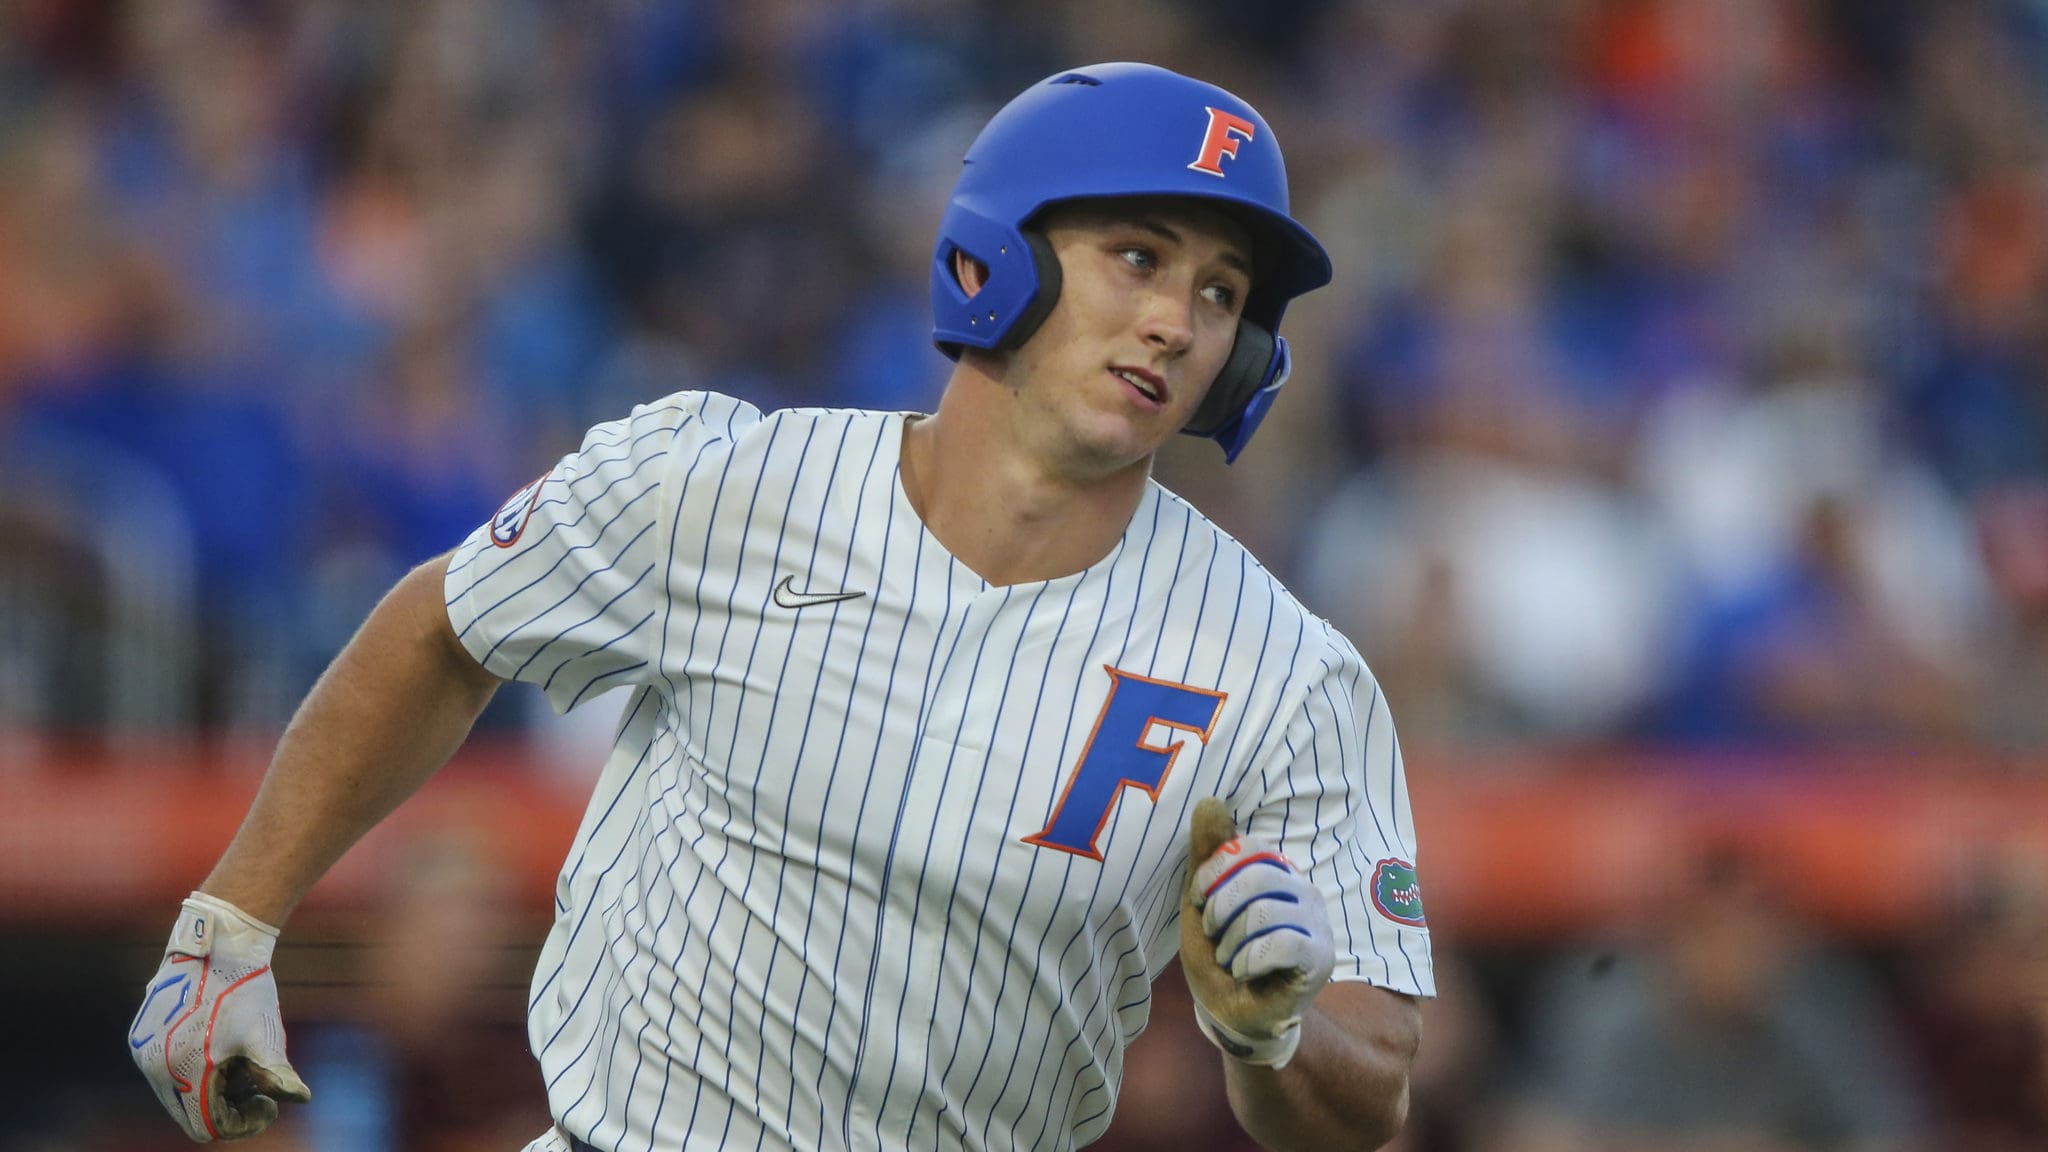 Florida Baseball: Seven Gators named All-Americans by various outlets